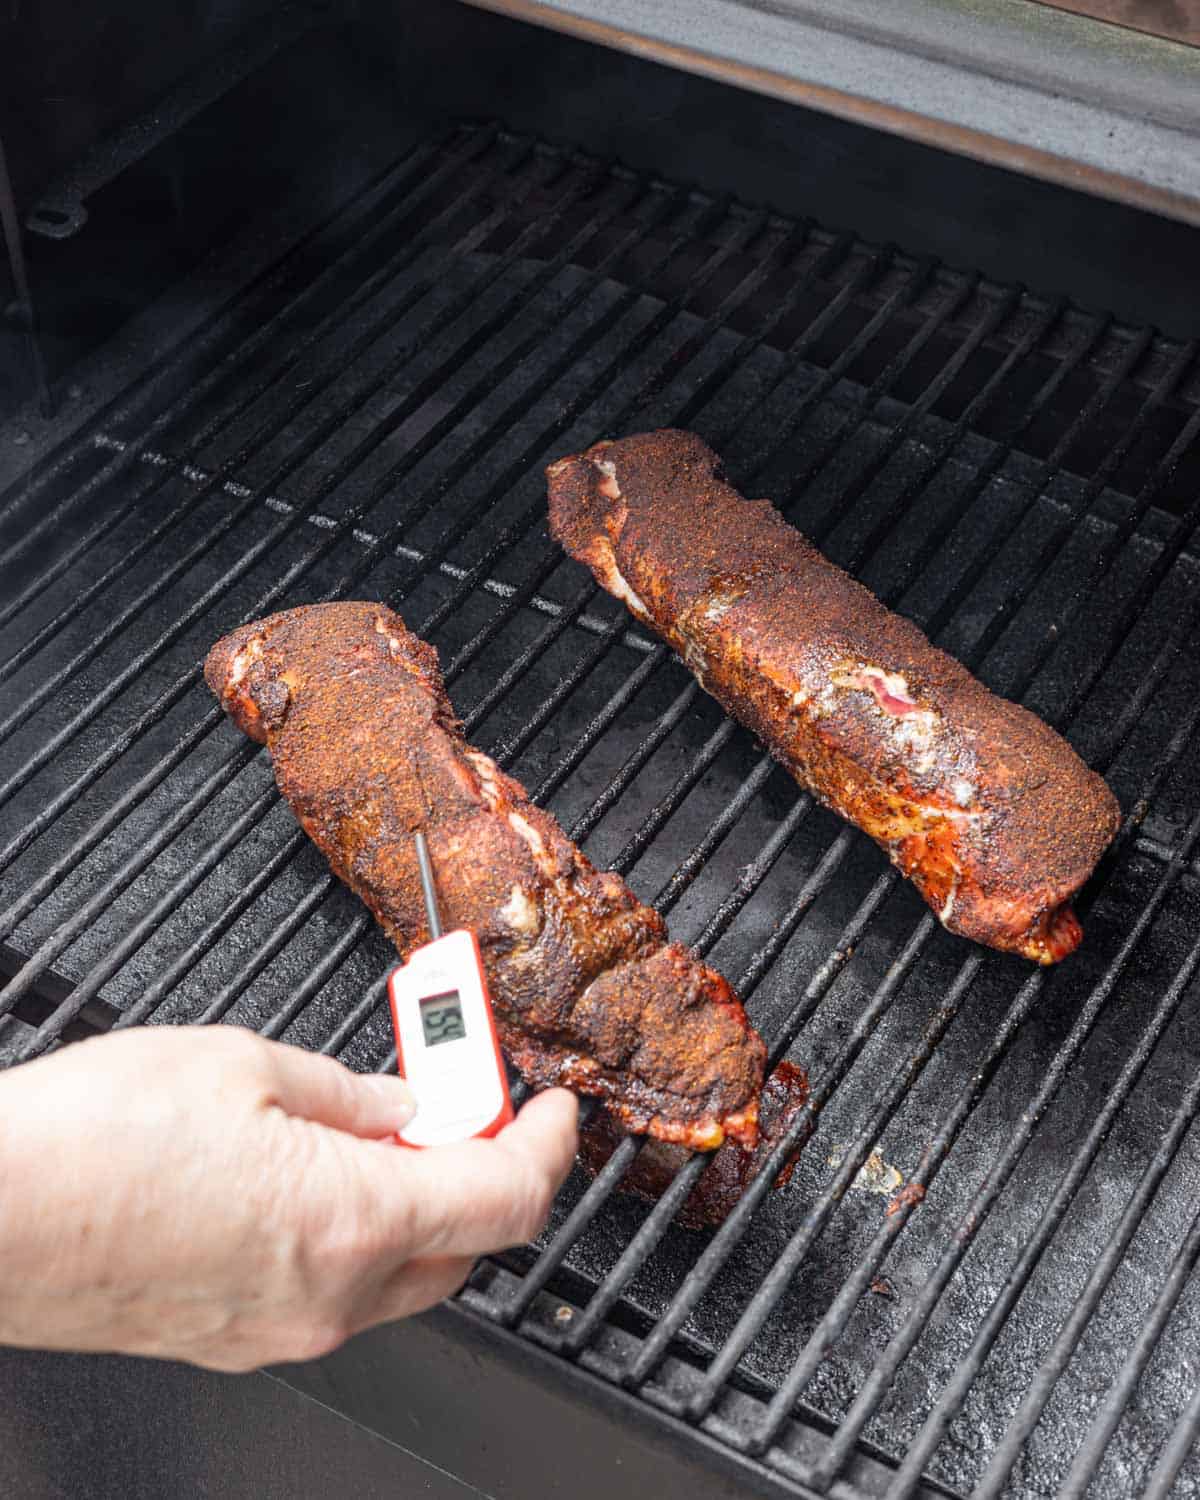 Two pork tenderloins on the smoker grates with thermometer inserted checking internal temperature.